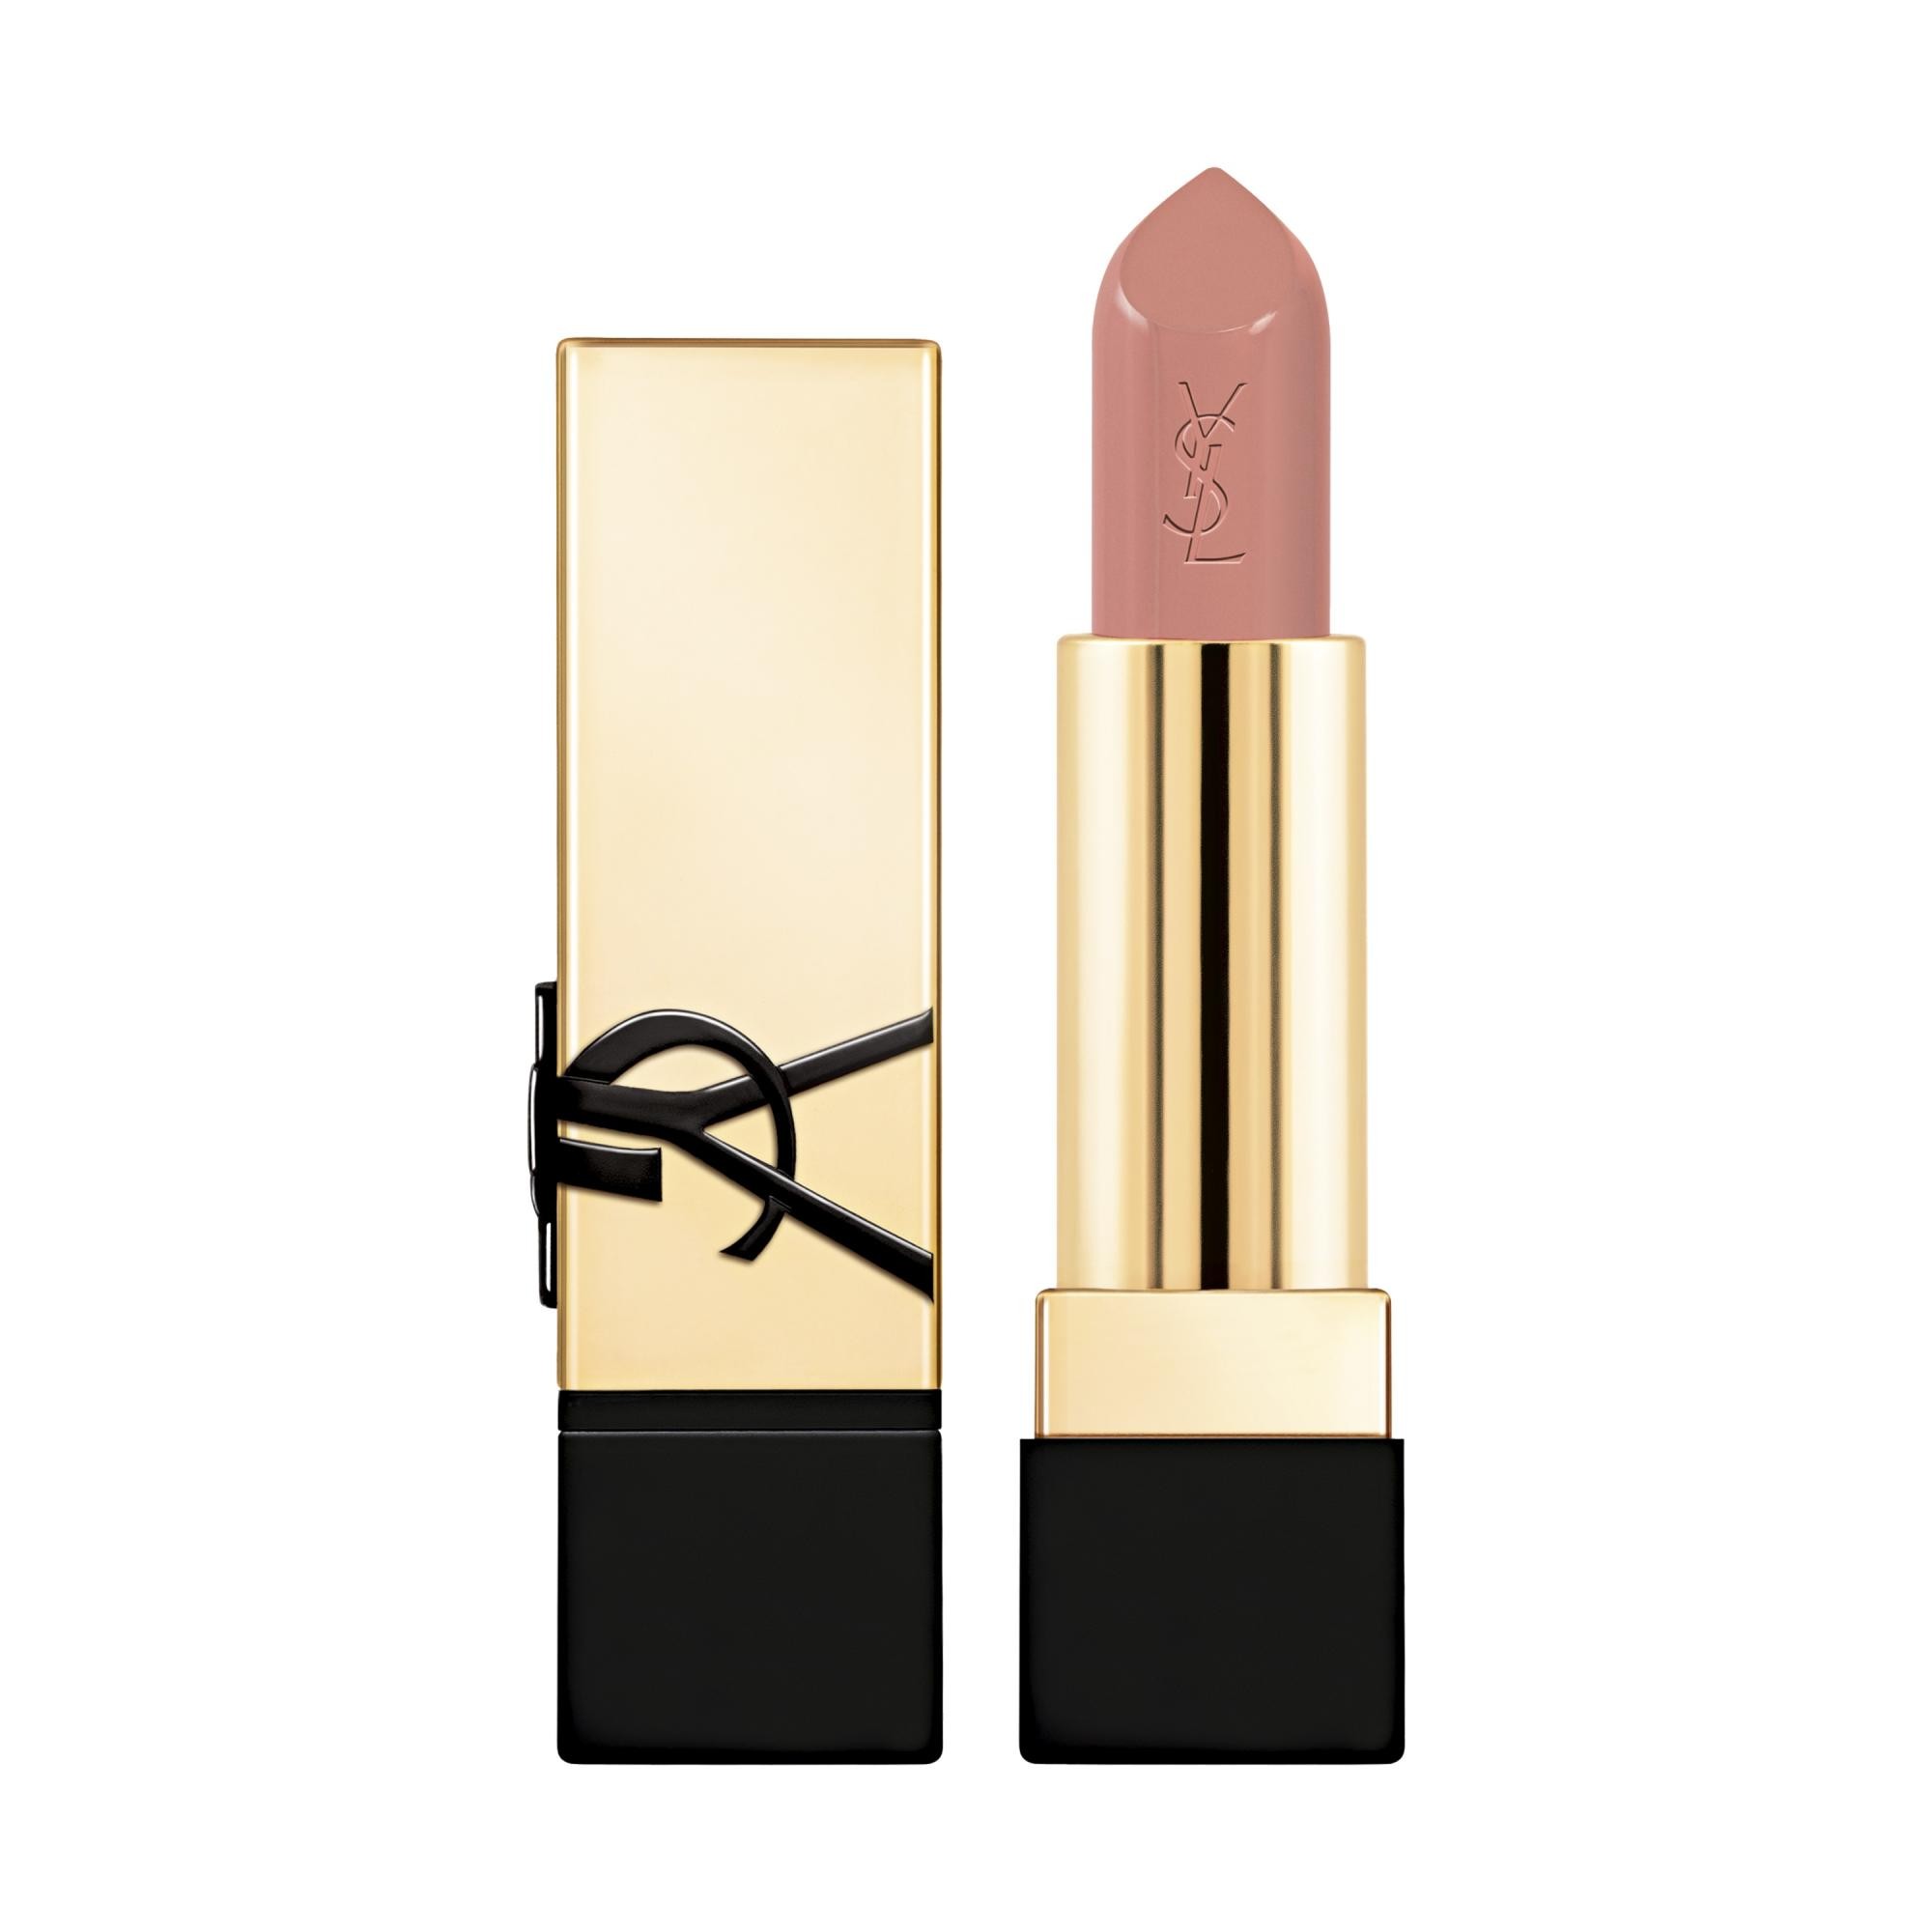 Yves Saint Laurent Rouge Pur Couture Rossetto Satinato N3 Nude 3.8g